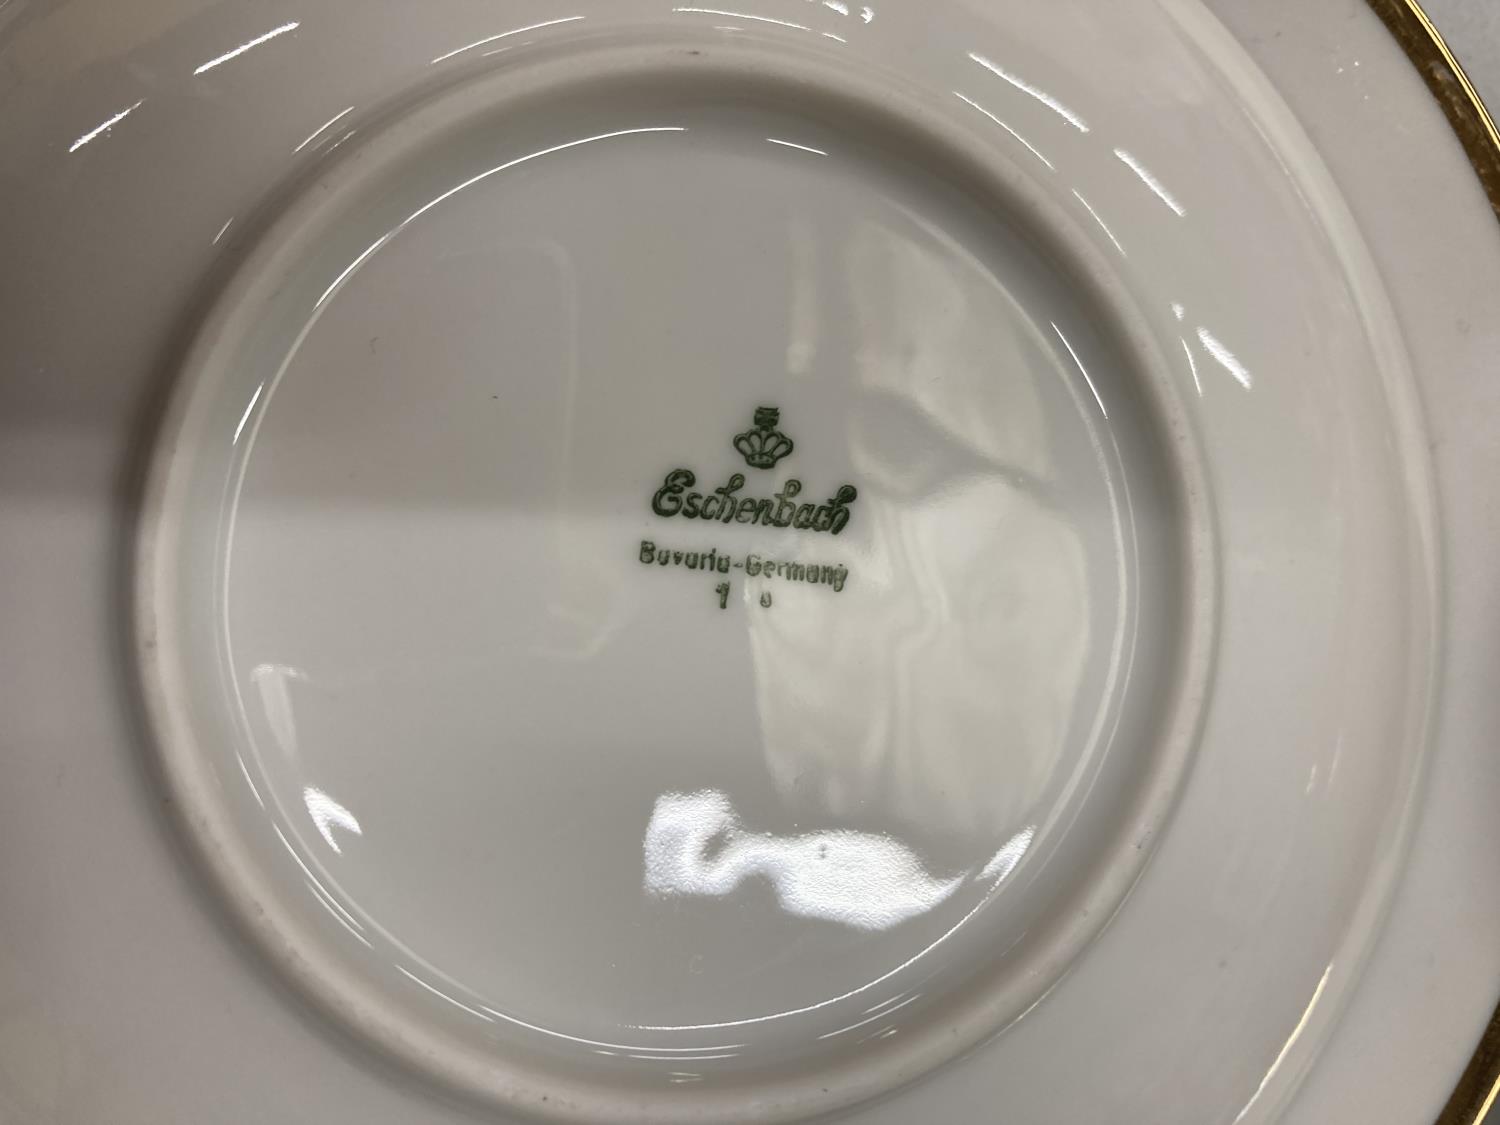 AN ESCHENBACH GERMAN PART DINNER SERVICE TO INCLUDE VARIOUS SIZED PLATES, BOWLS, CUPS, SAUCERS, ETC - Image 4 of 4